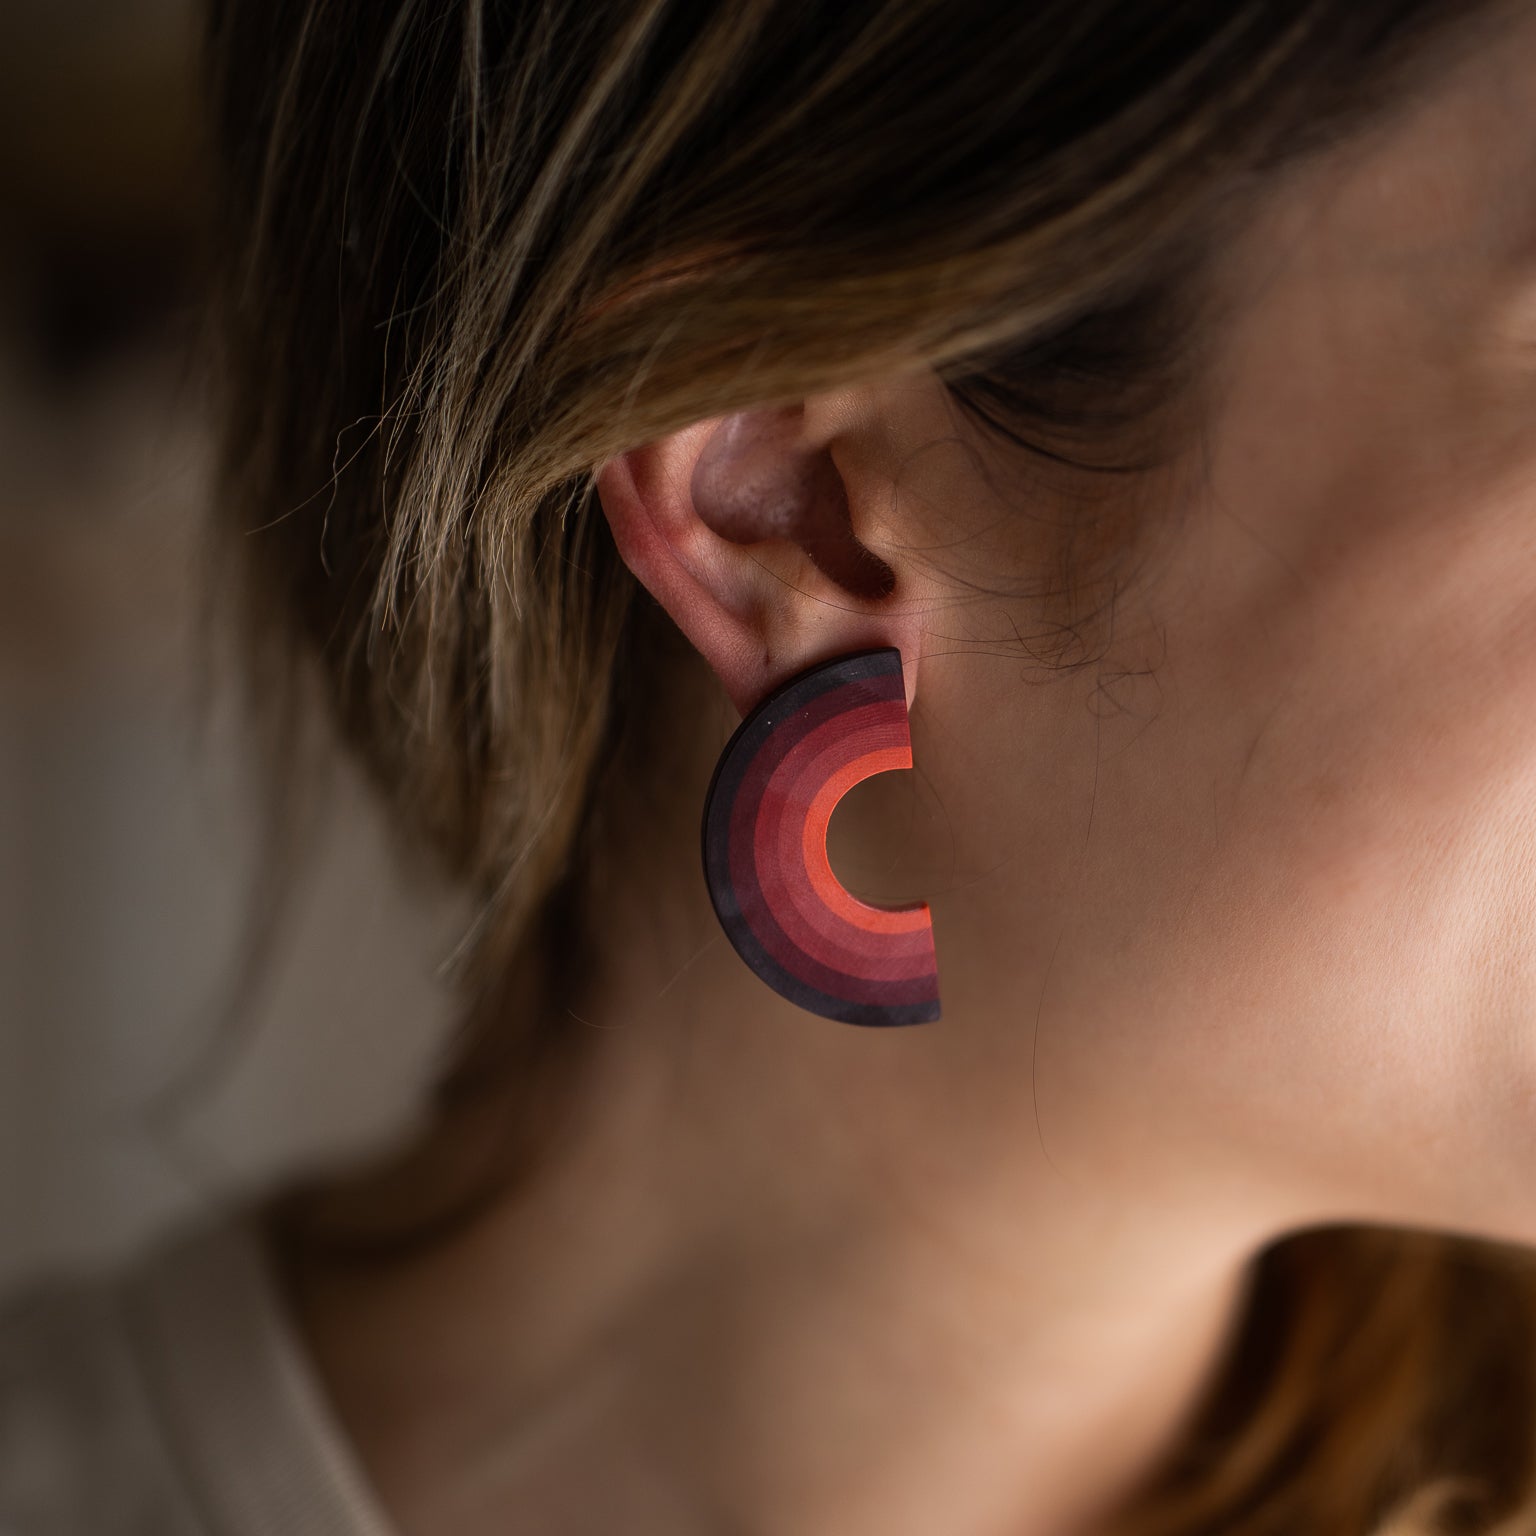 Earrings made from compressed paper with a titanium stud on model's ear.